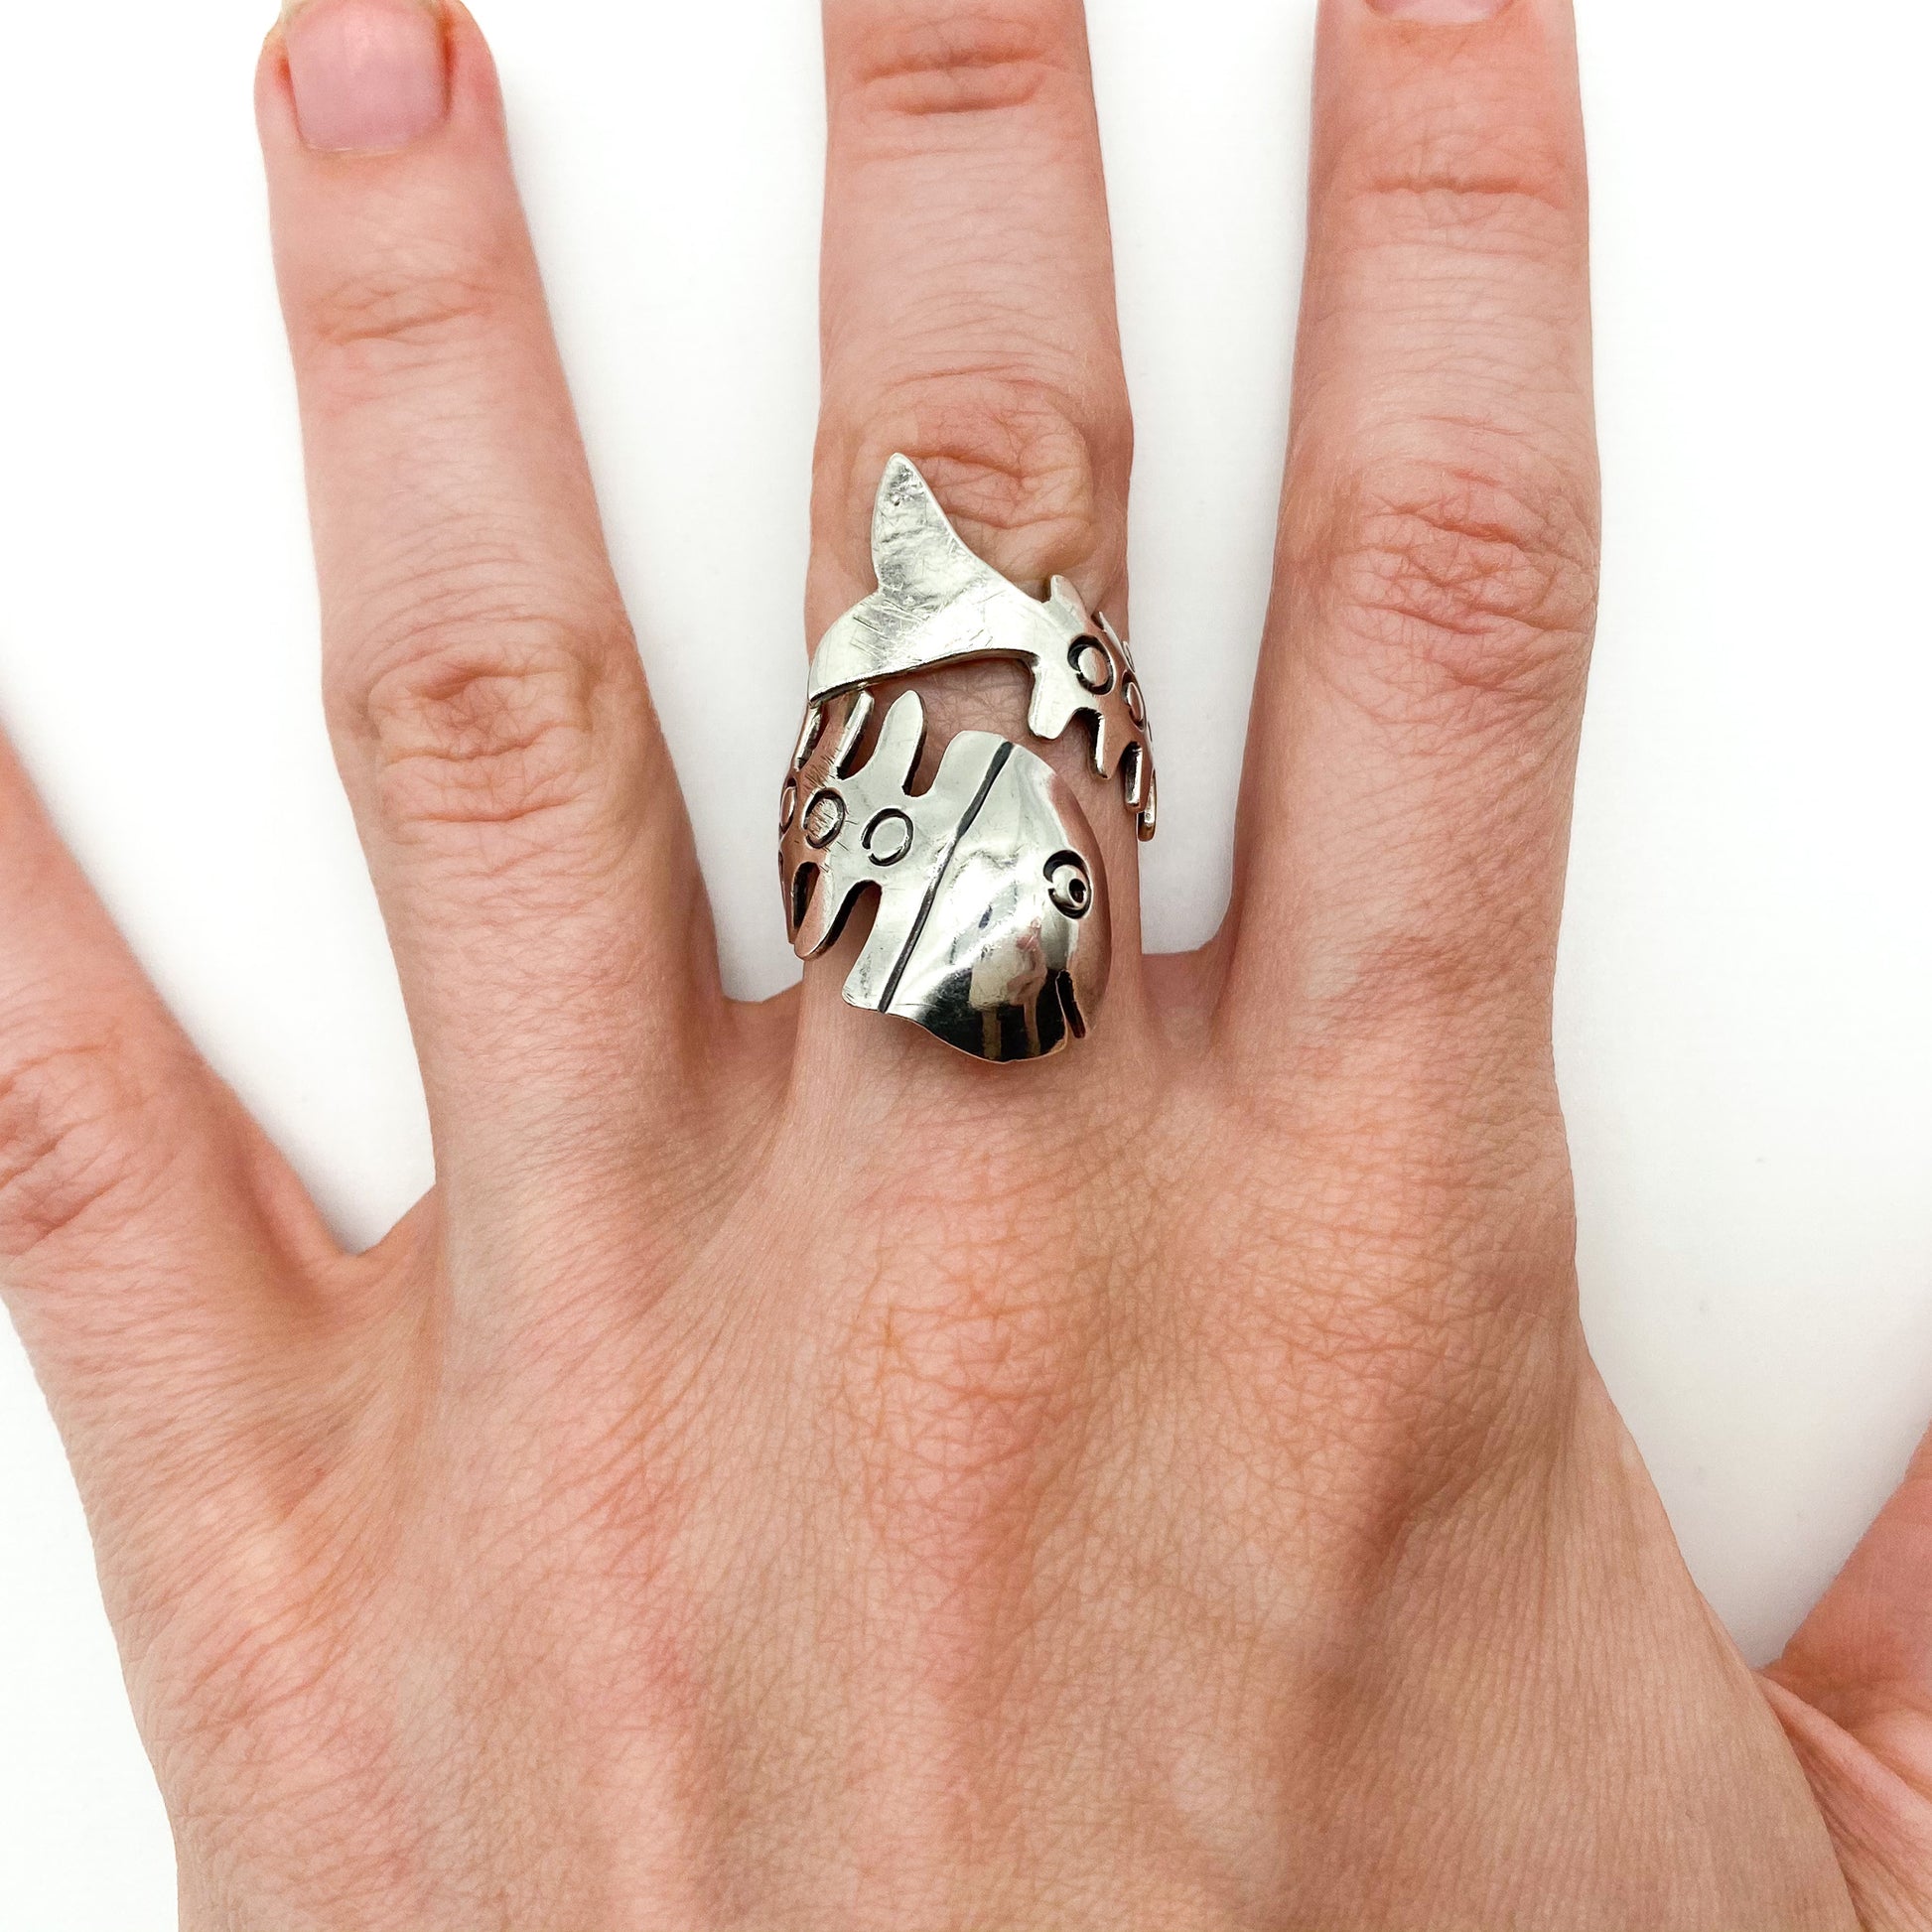 Vintage sterling silver Mexican ring in the shape of a fish skeleton.